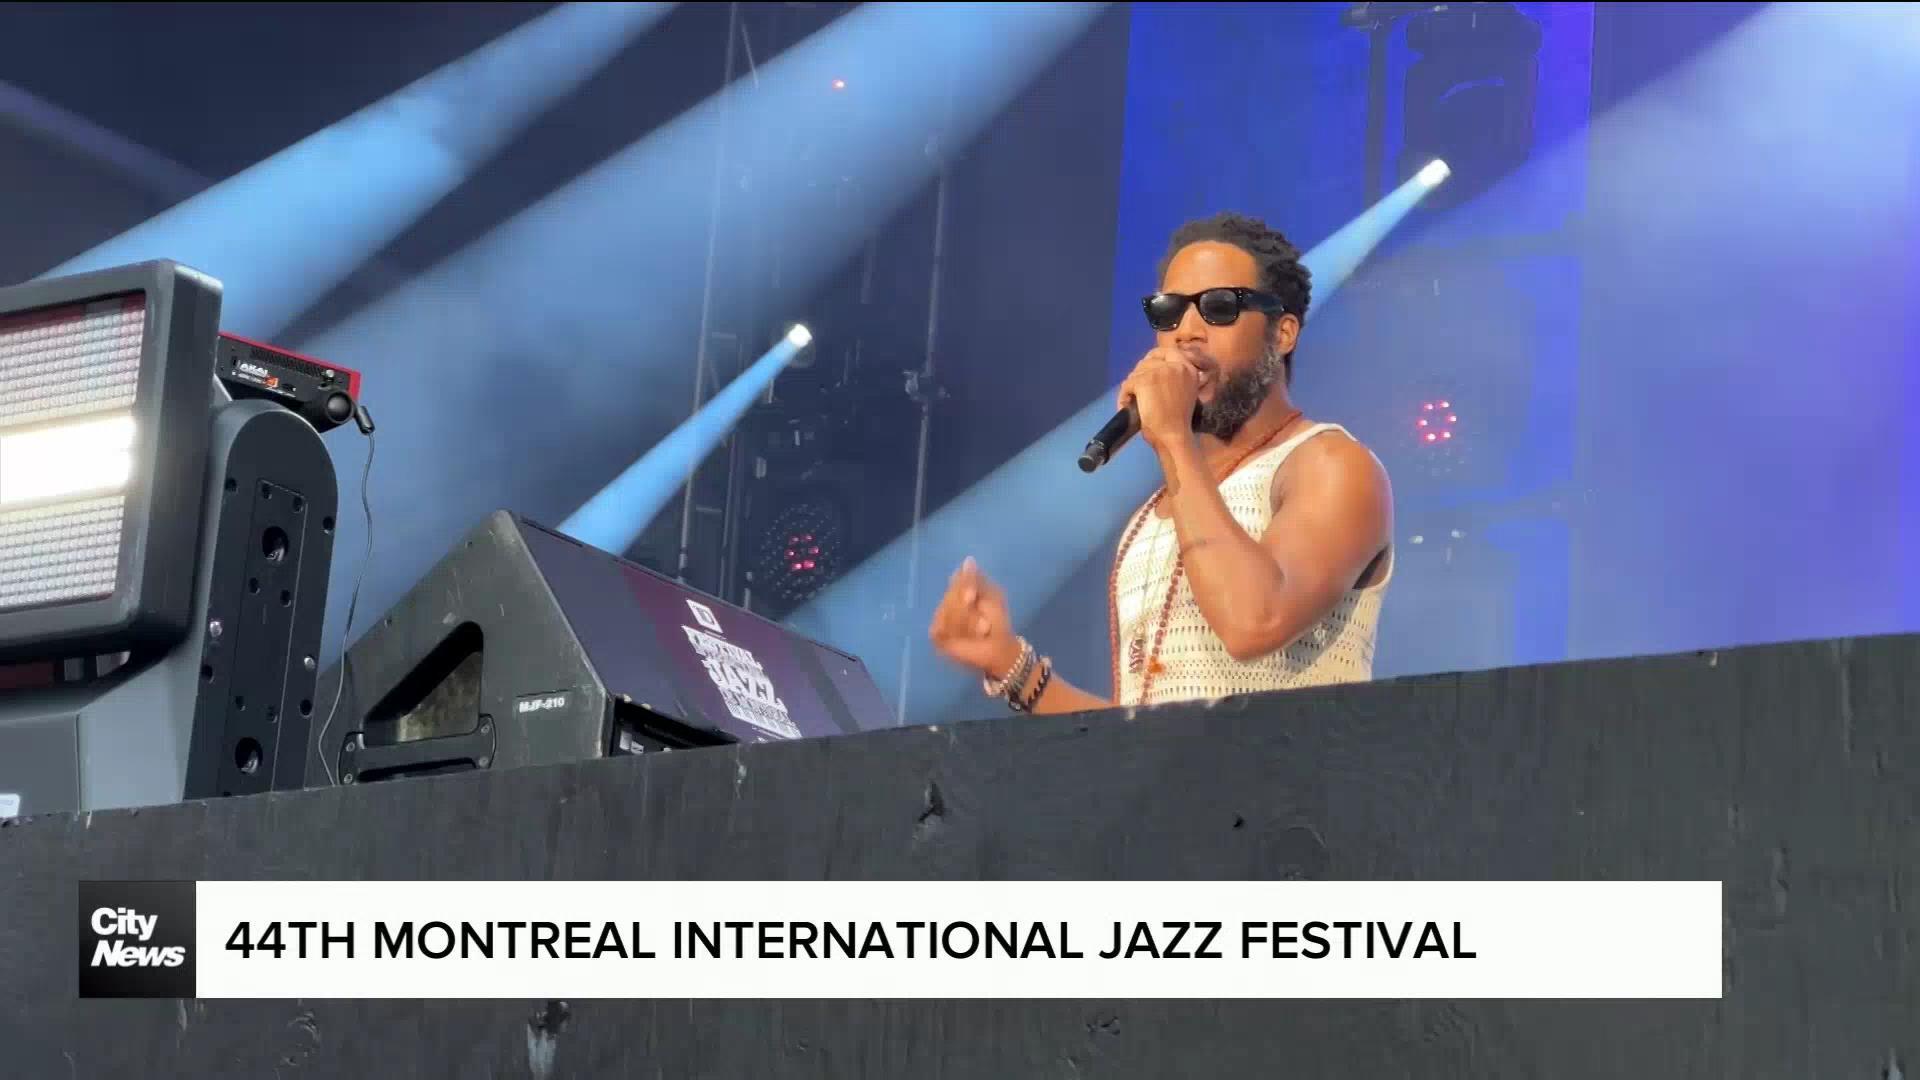 Sights and sounds from the 44th Montreal International Jazz Festival